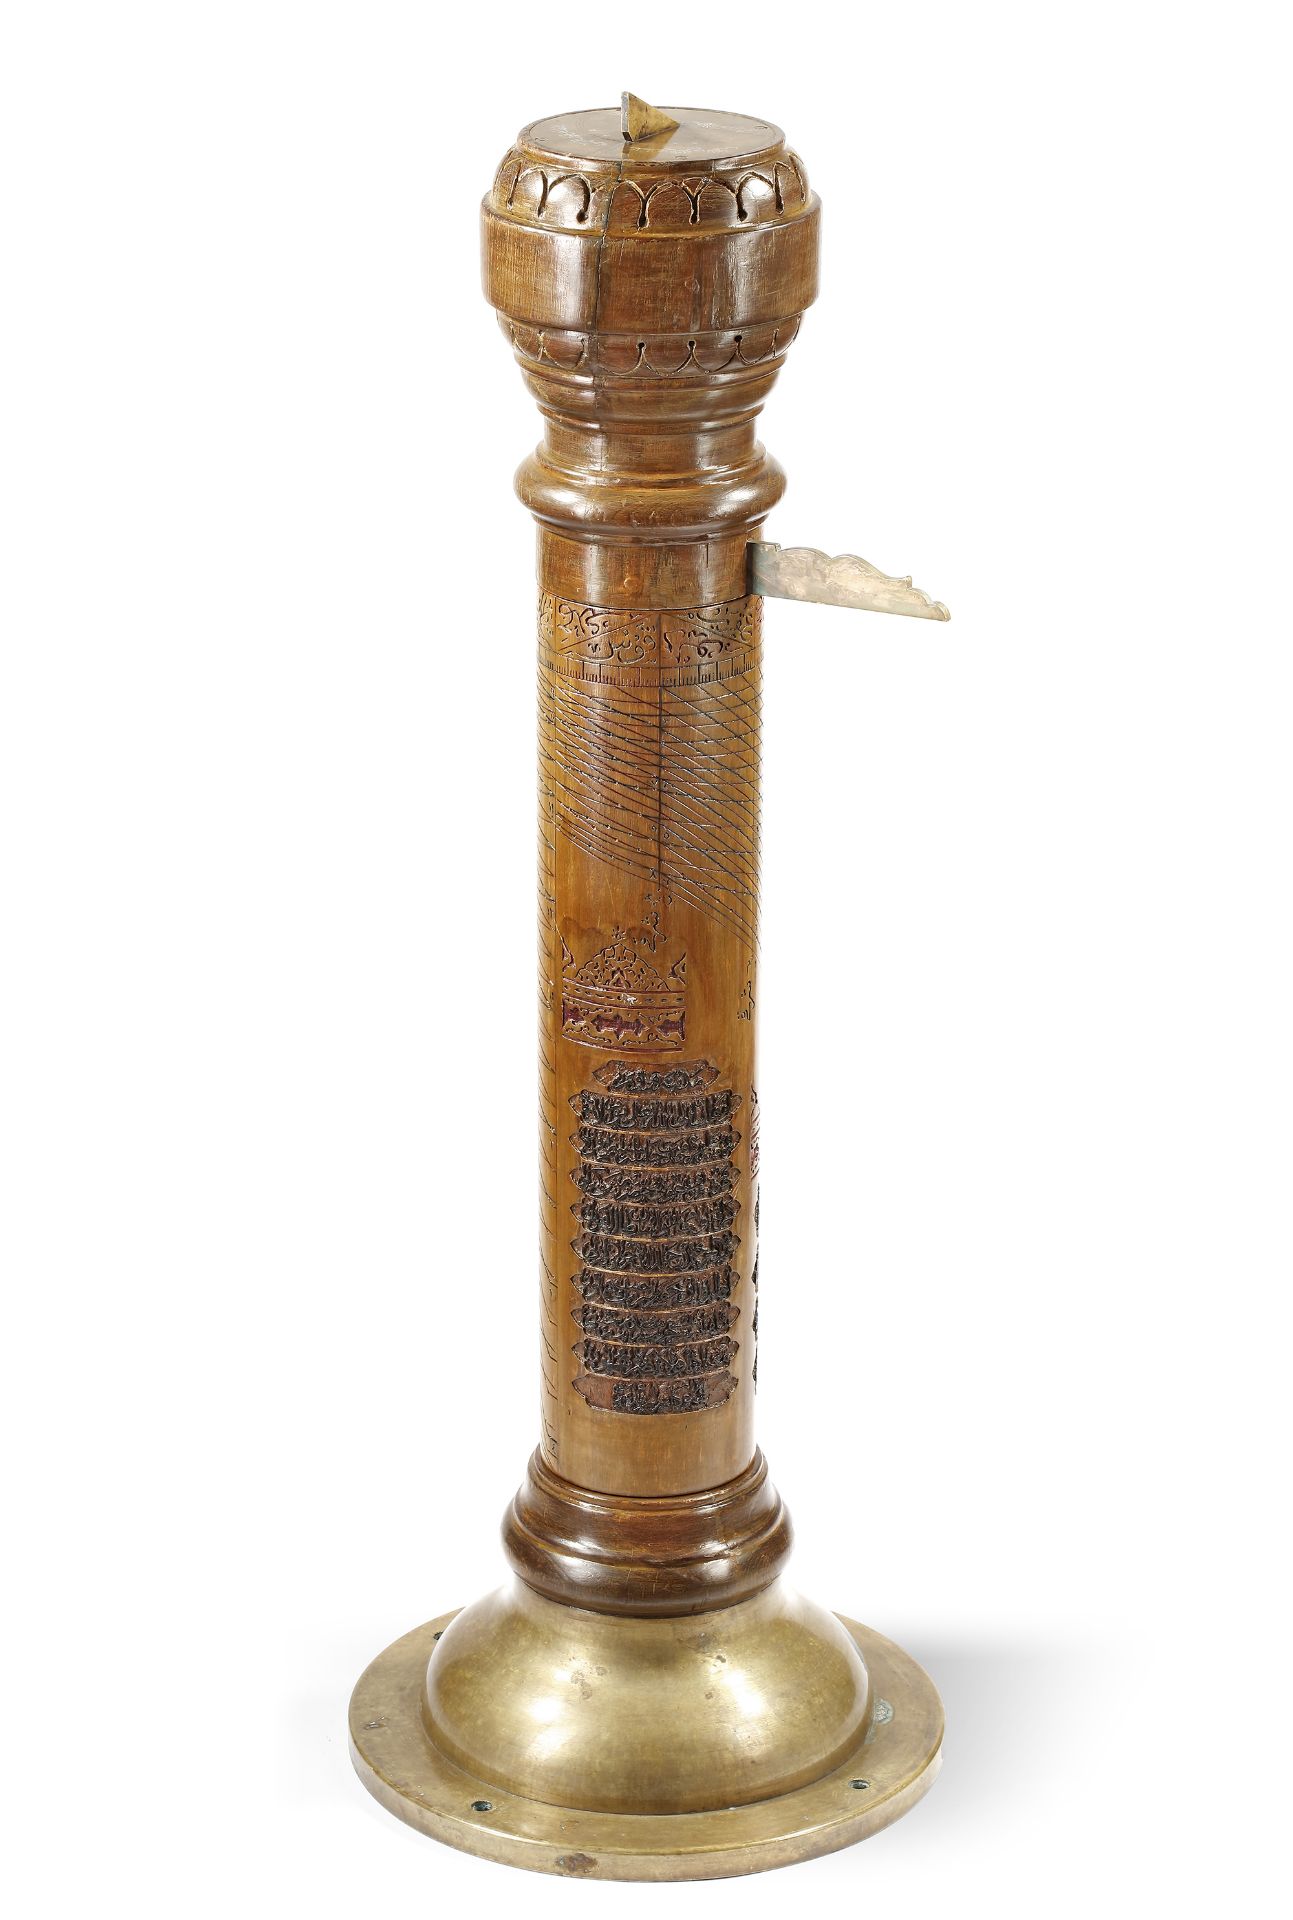 AN EXCEPTIONALLY RARE AND MONUMENTAL OTTOMAN SUNDIAL SENT AS GIFT TO MEDINA, PROBABLY BY SULTAN ABDU - Image 6 of 7